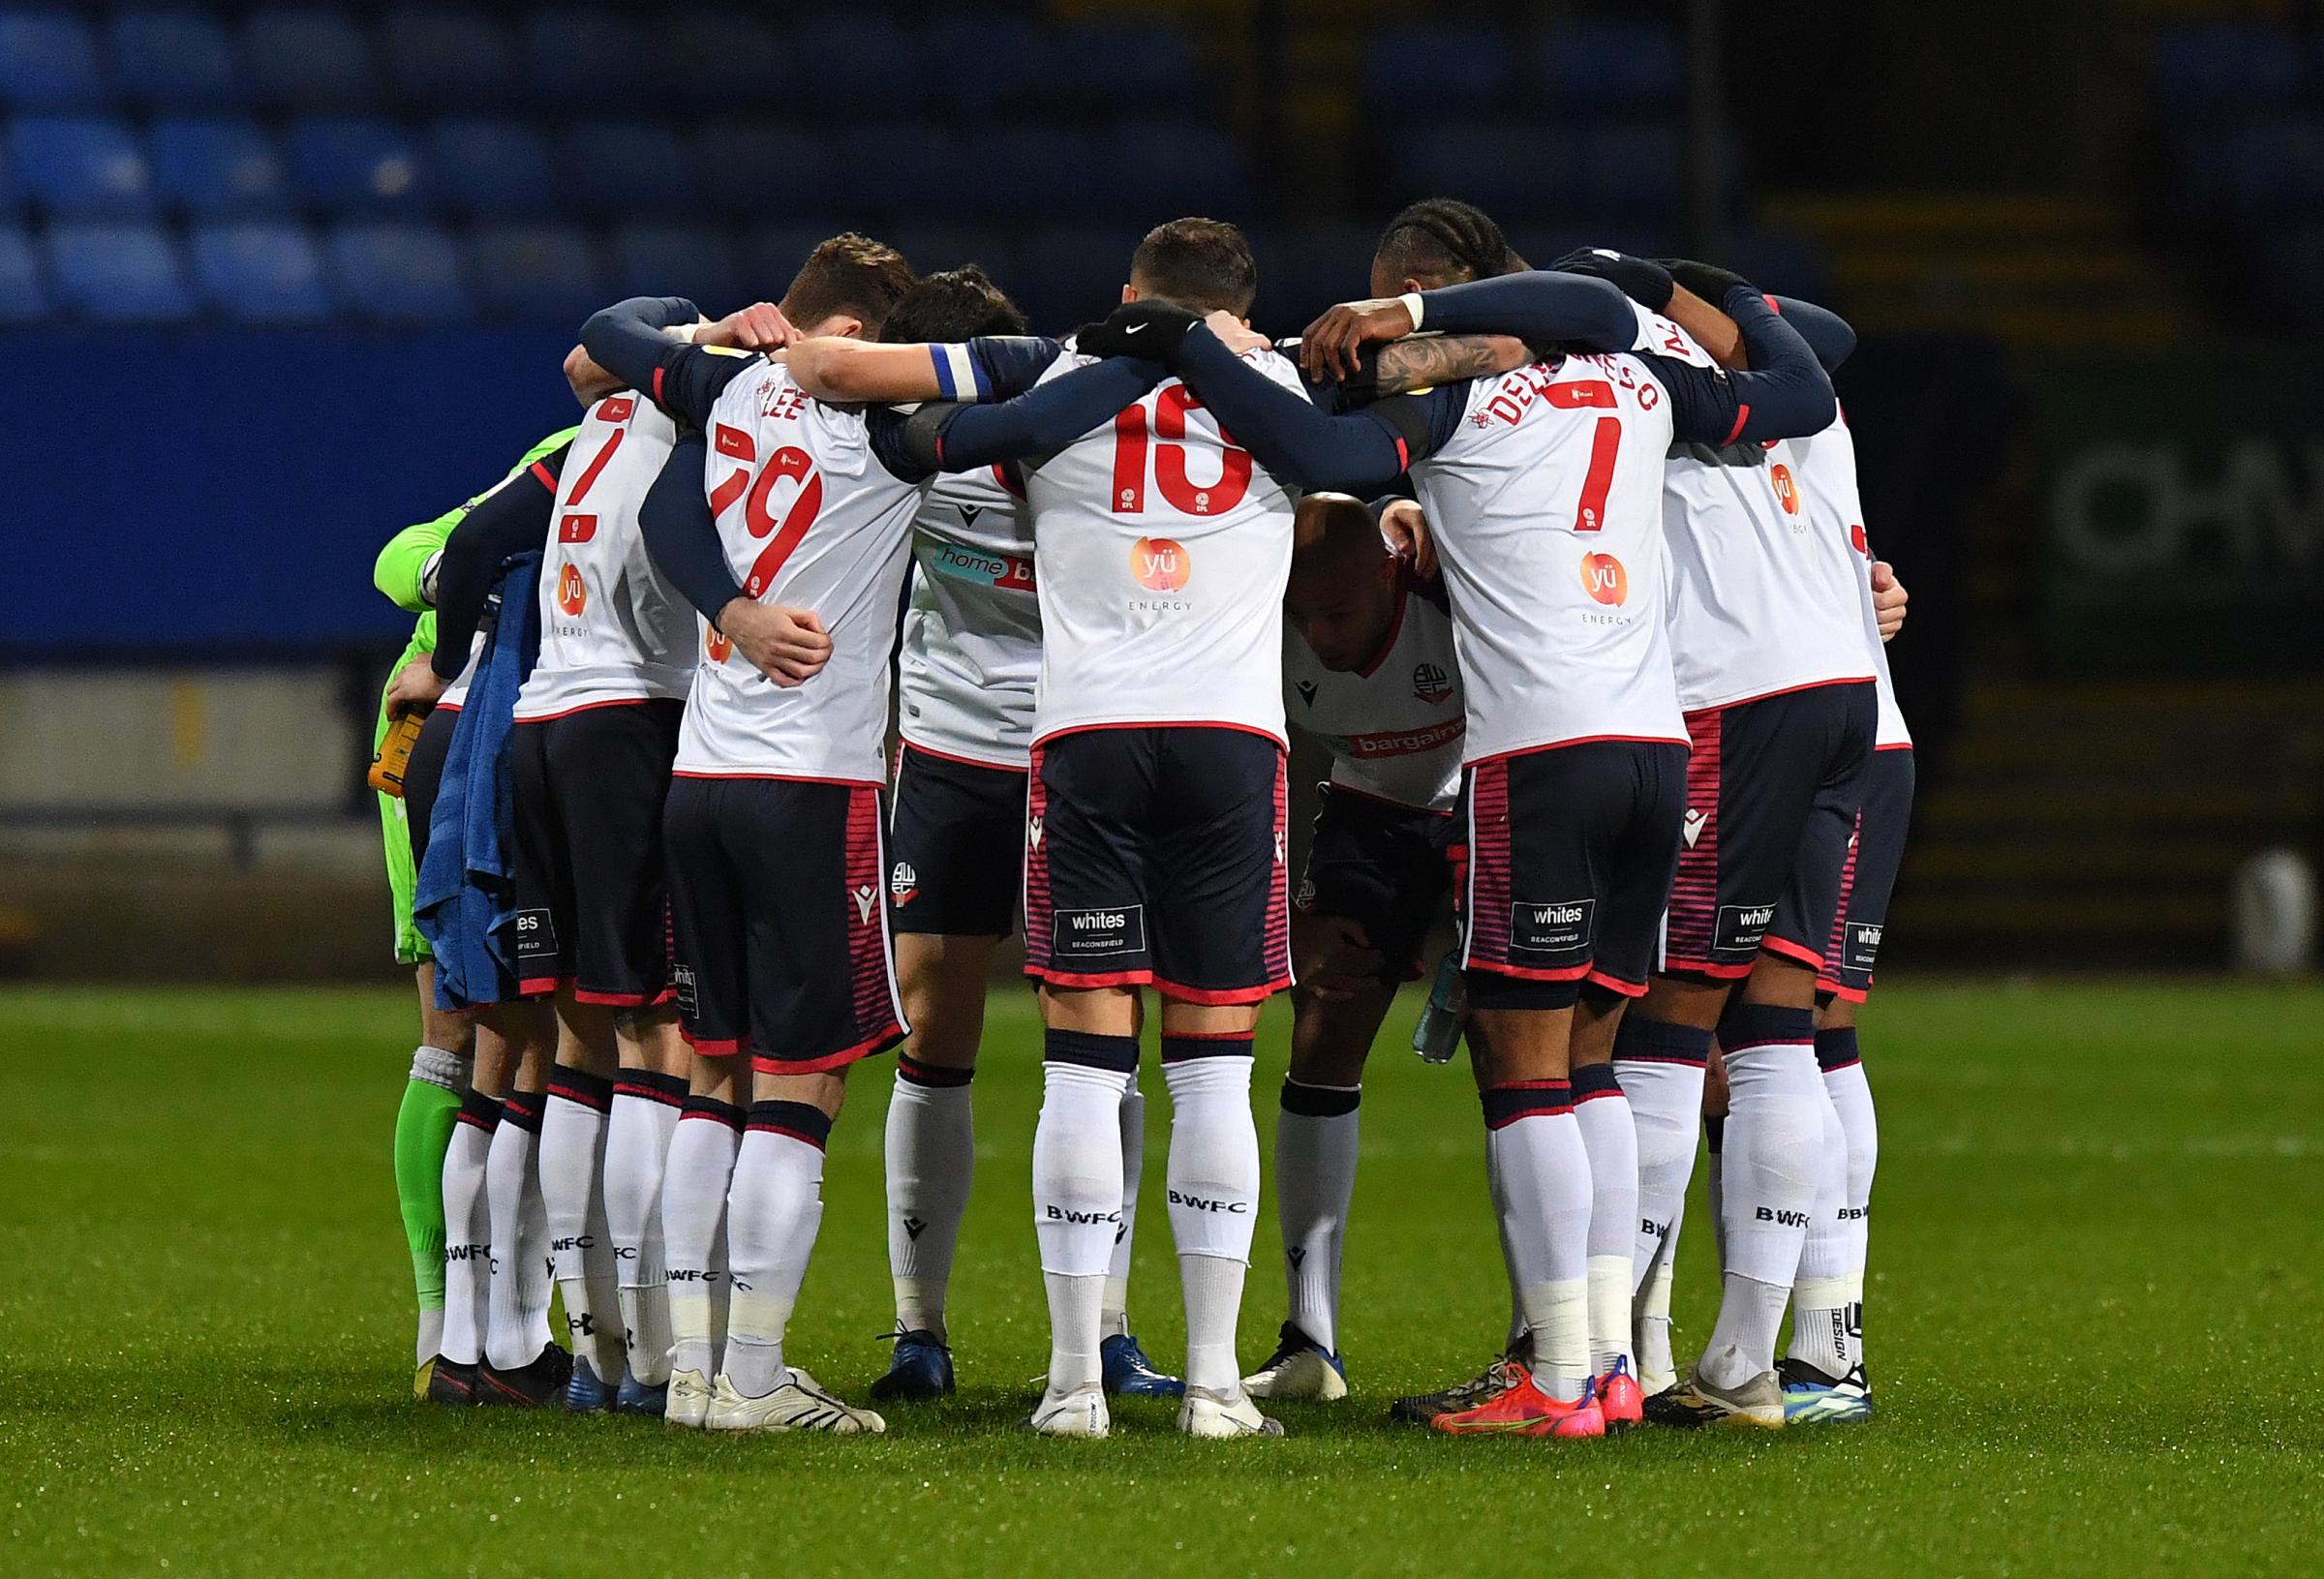 The Bolton Wanderers players in a huddle before the kick off Photographer Dave Howarth/CameraSport The EFL Sky Bet League Two - Bolton Wanderers v Cambridge United - Tuesday 9th March 2021 - University of Bolton Stadium - Horwich, Bolton World